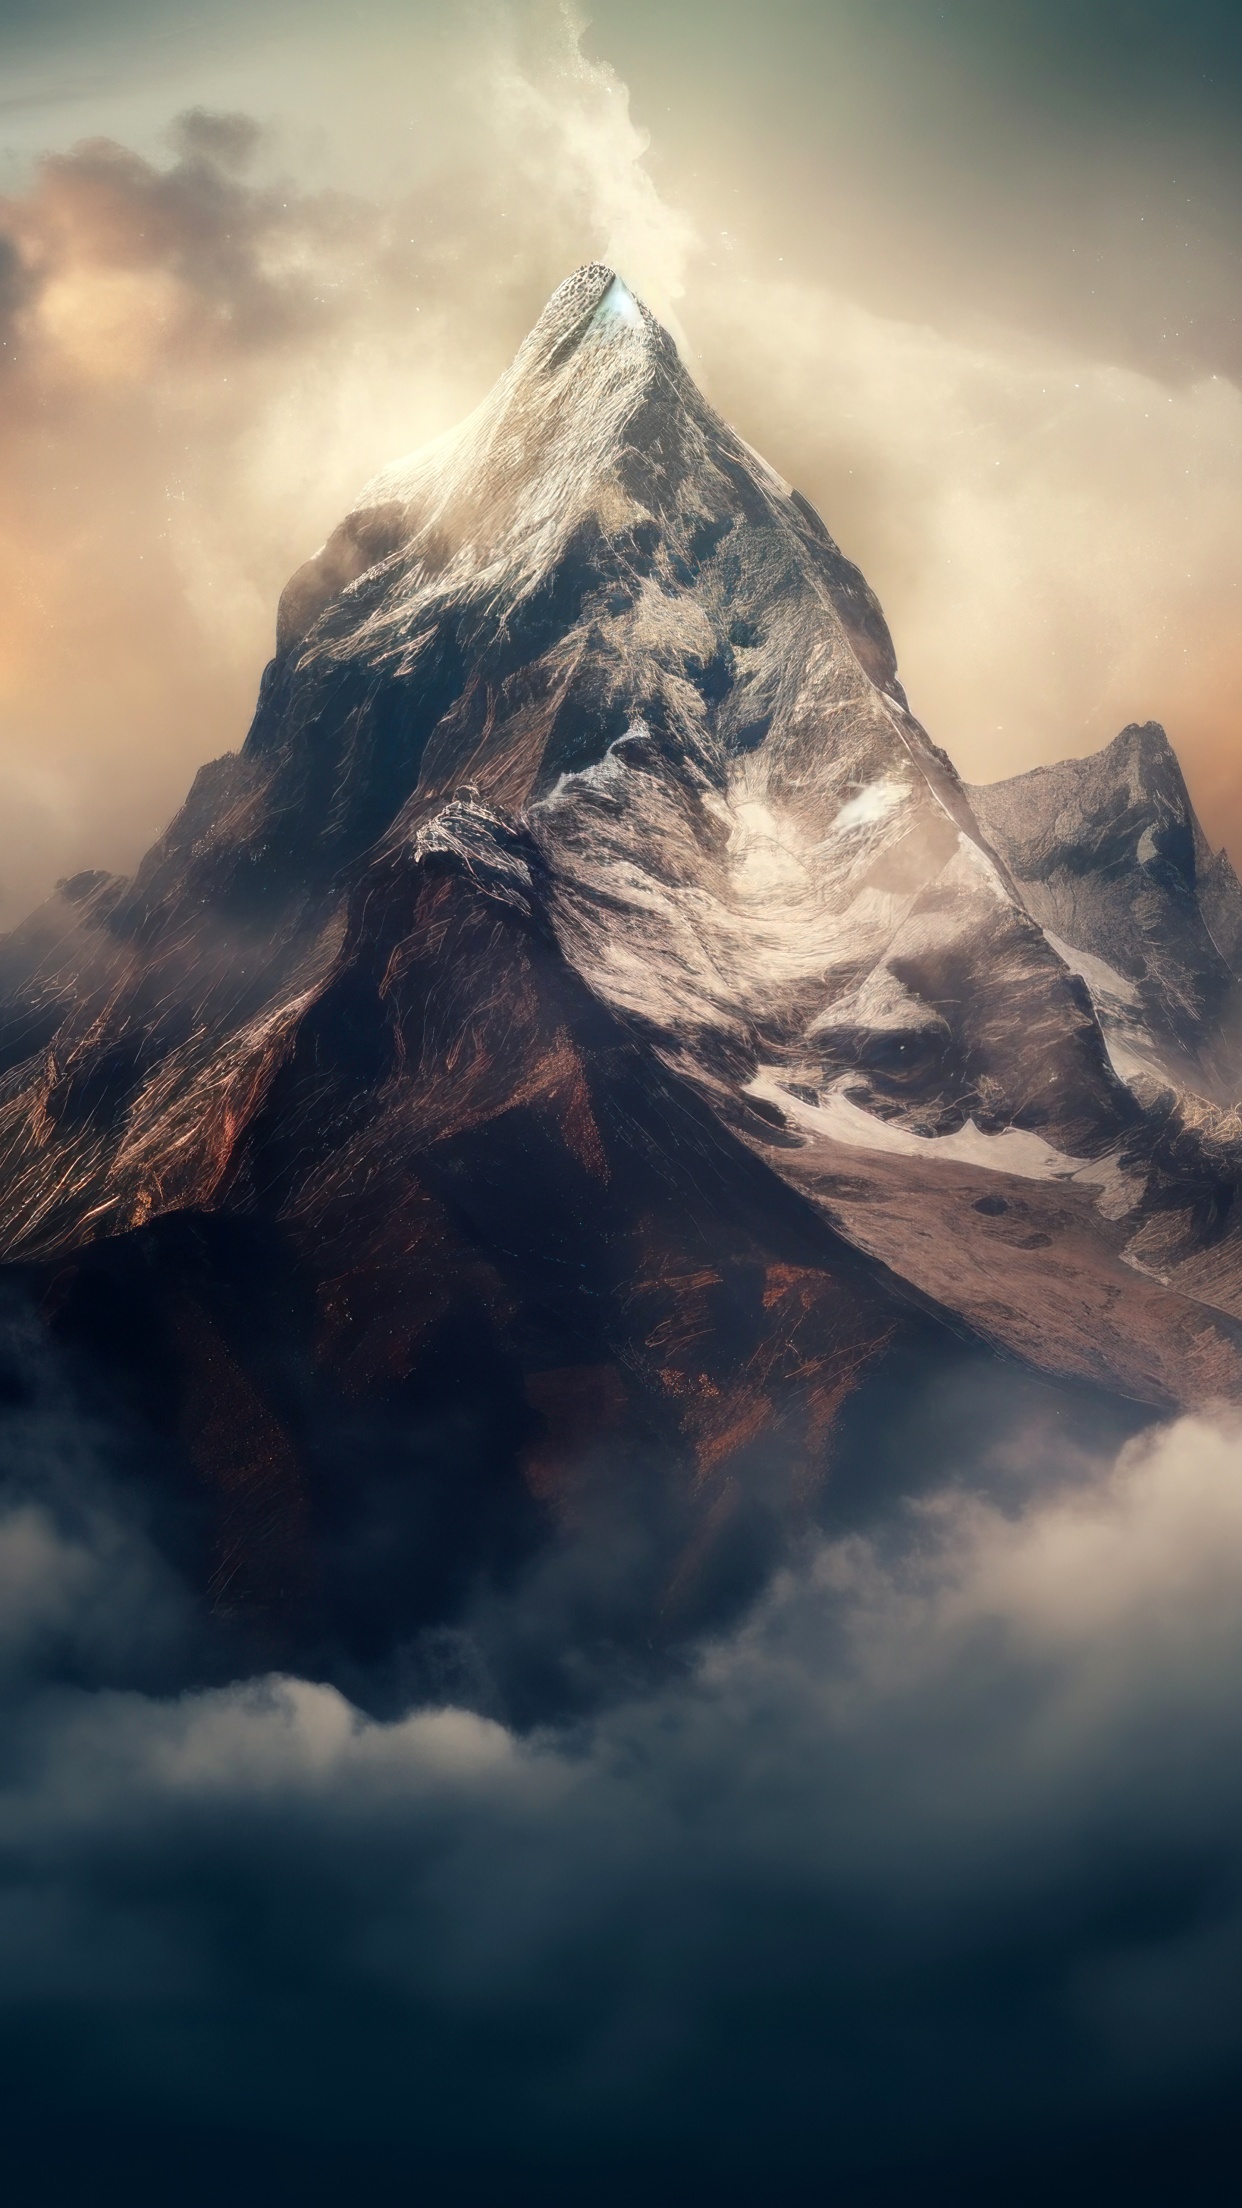 Mountain Pass HD Wallpaper for Android